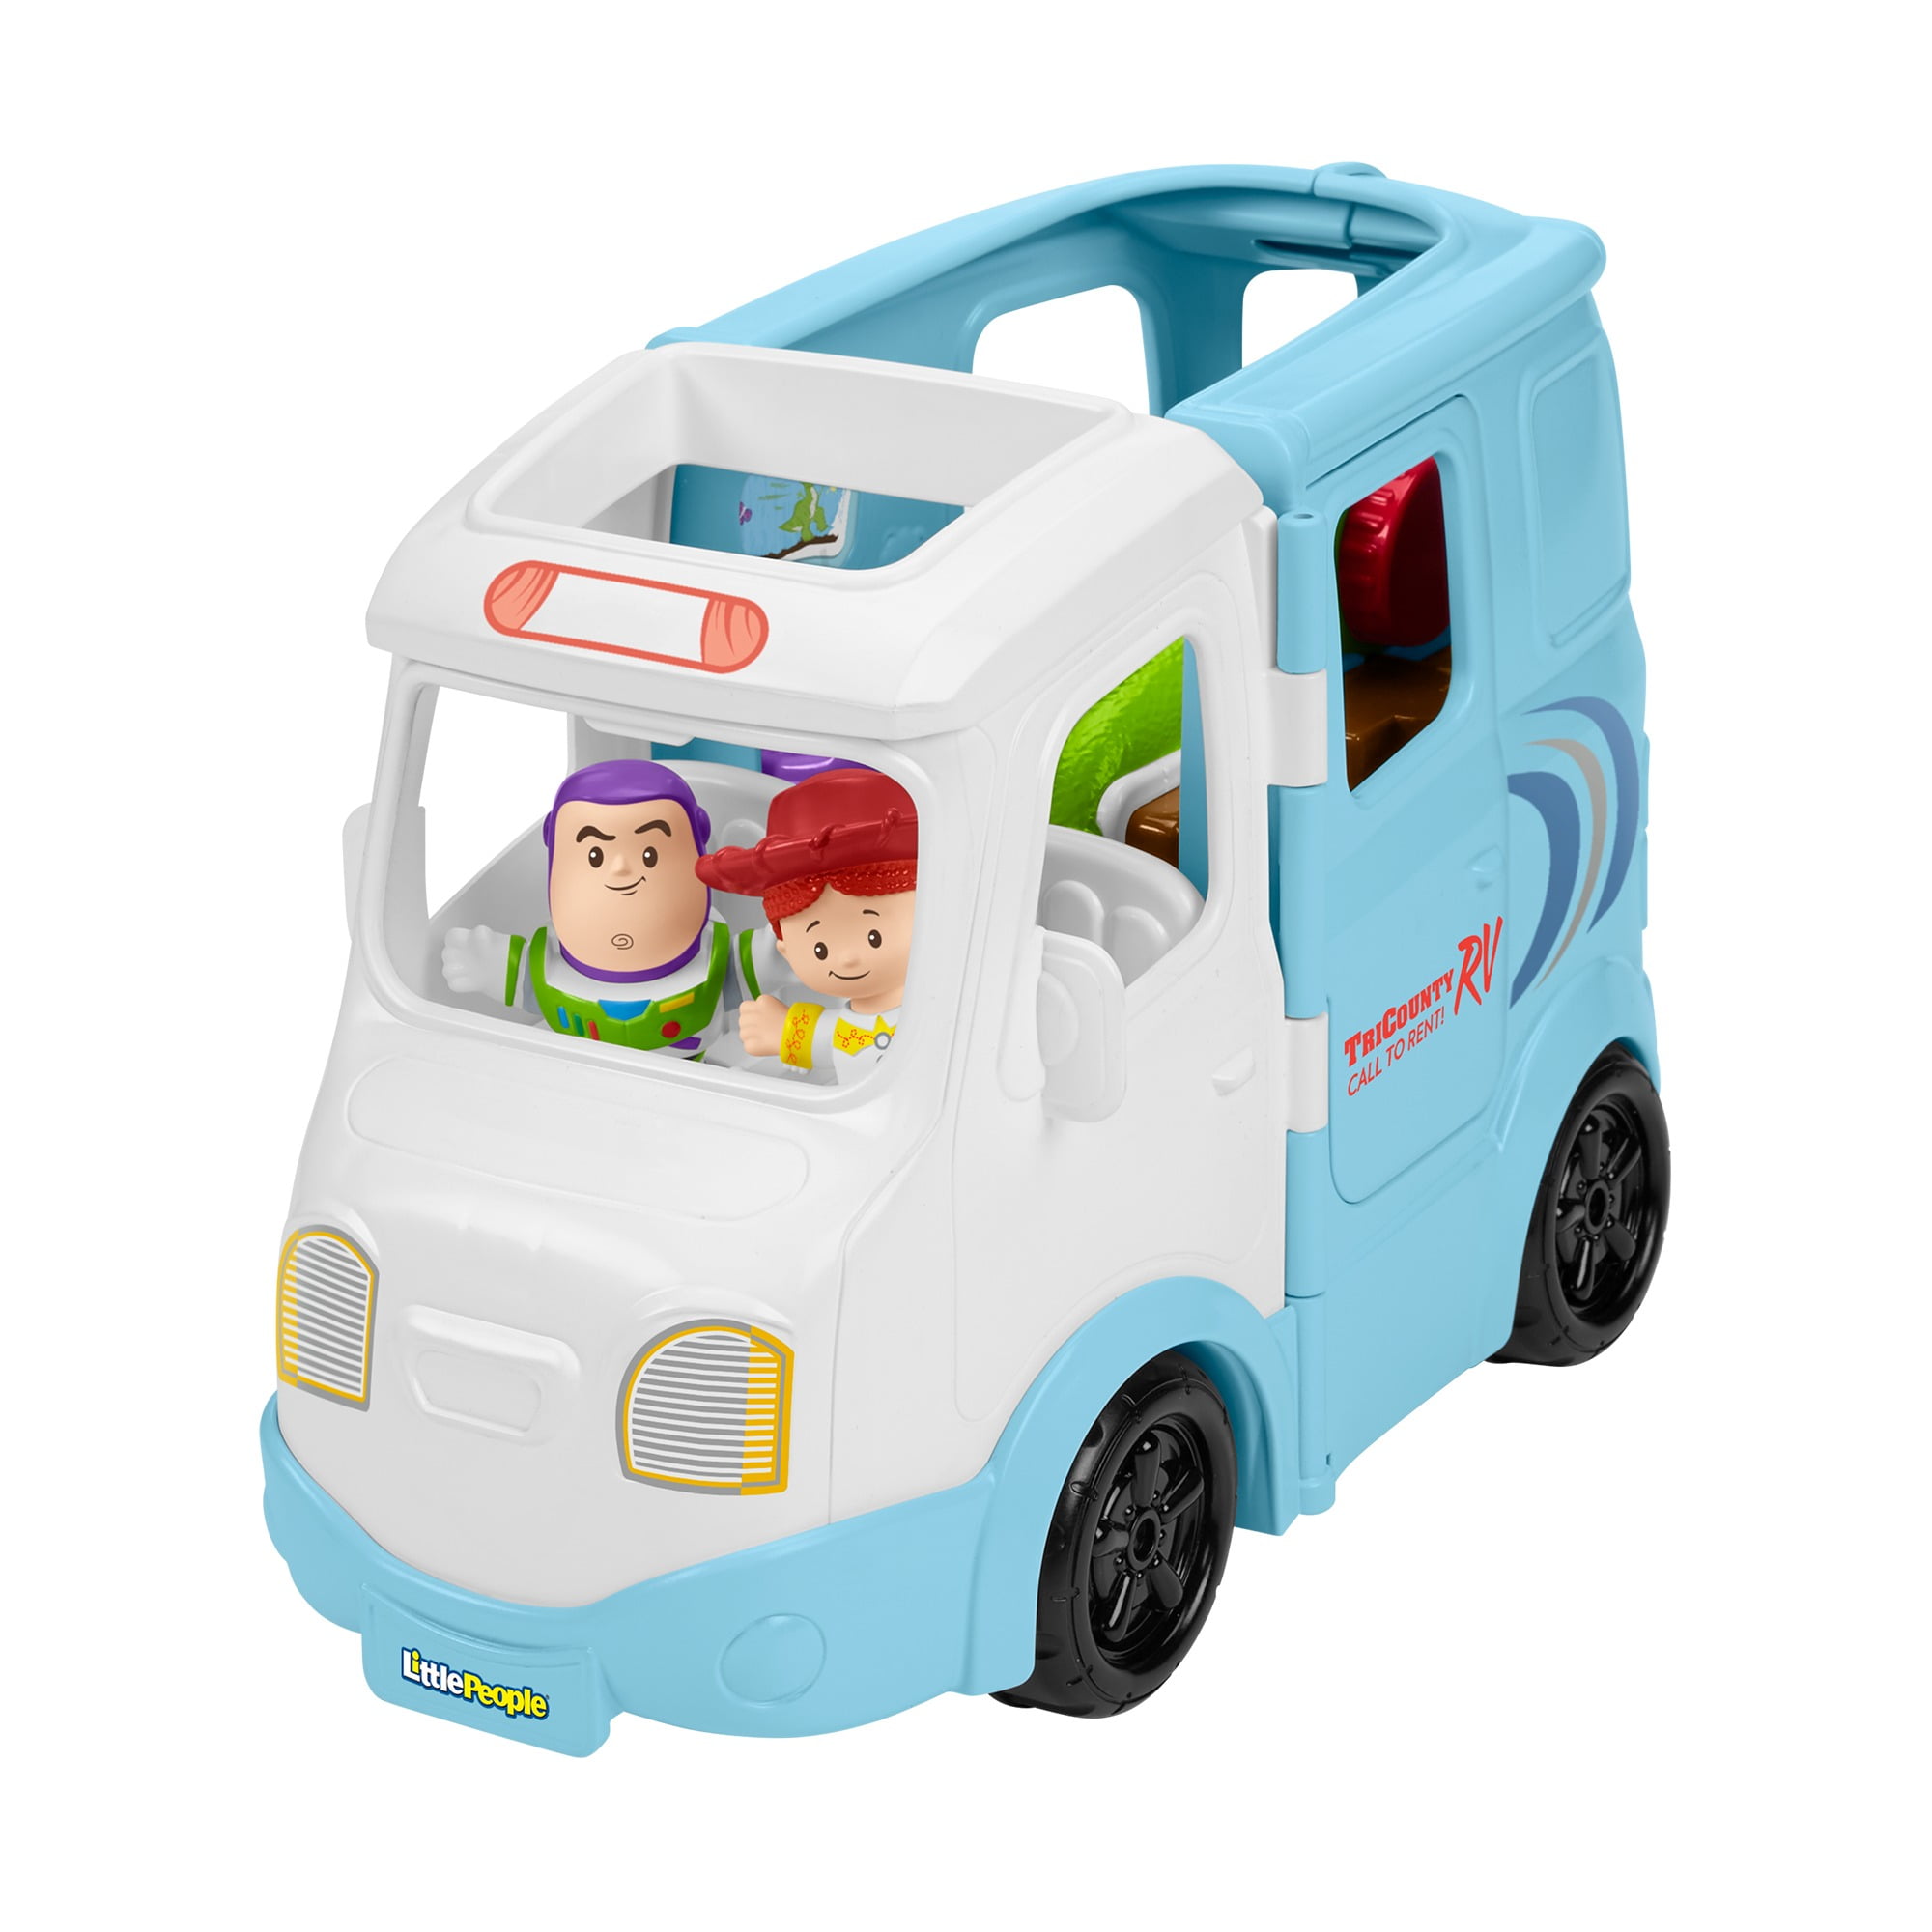 X0018 Little People Tow N Pull Tractor for sale online Fisher